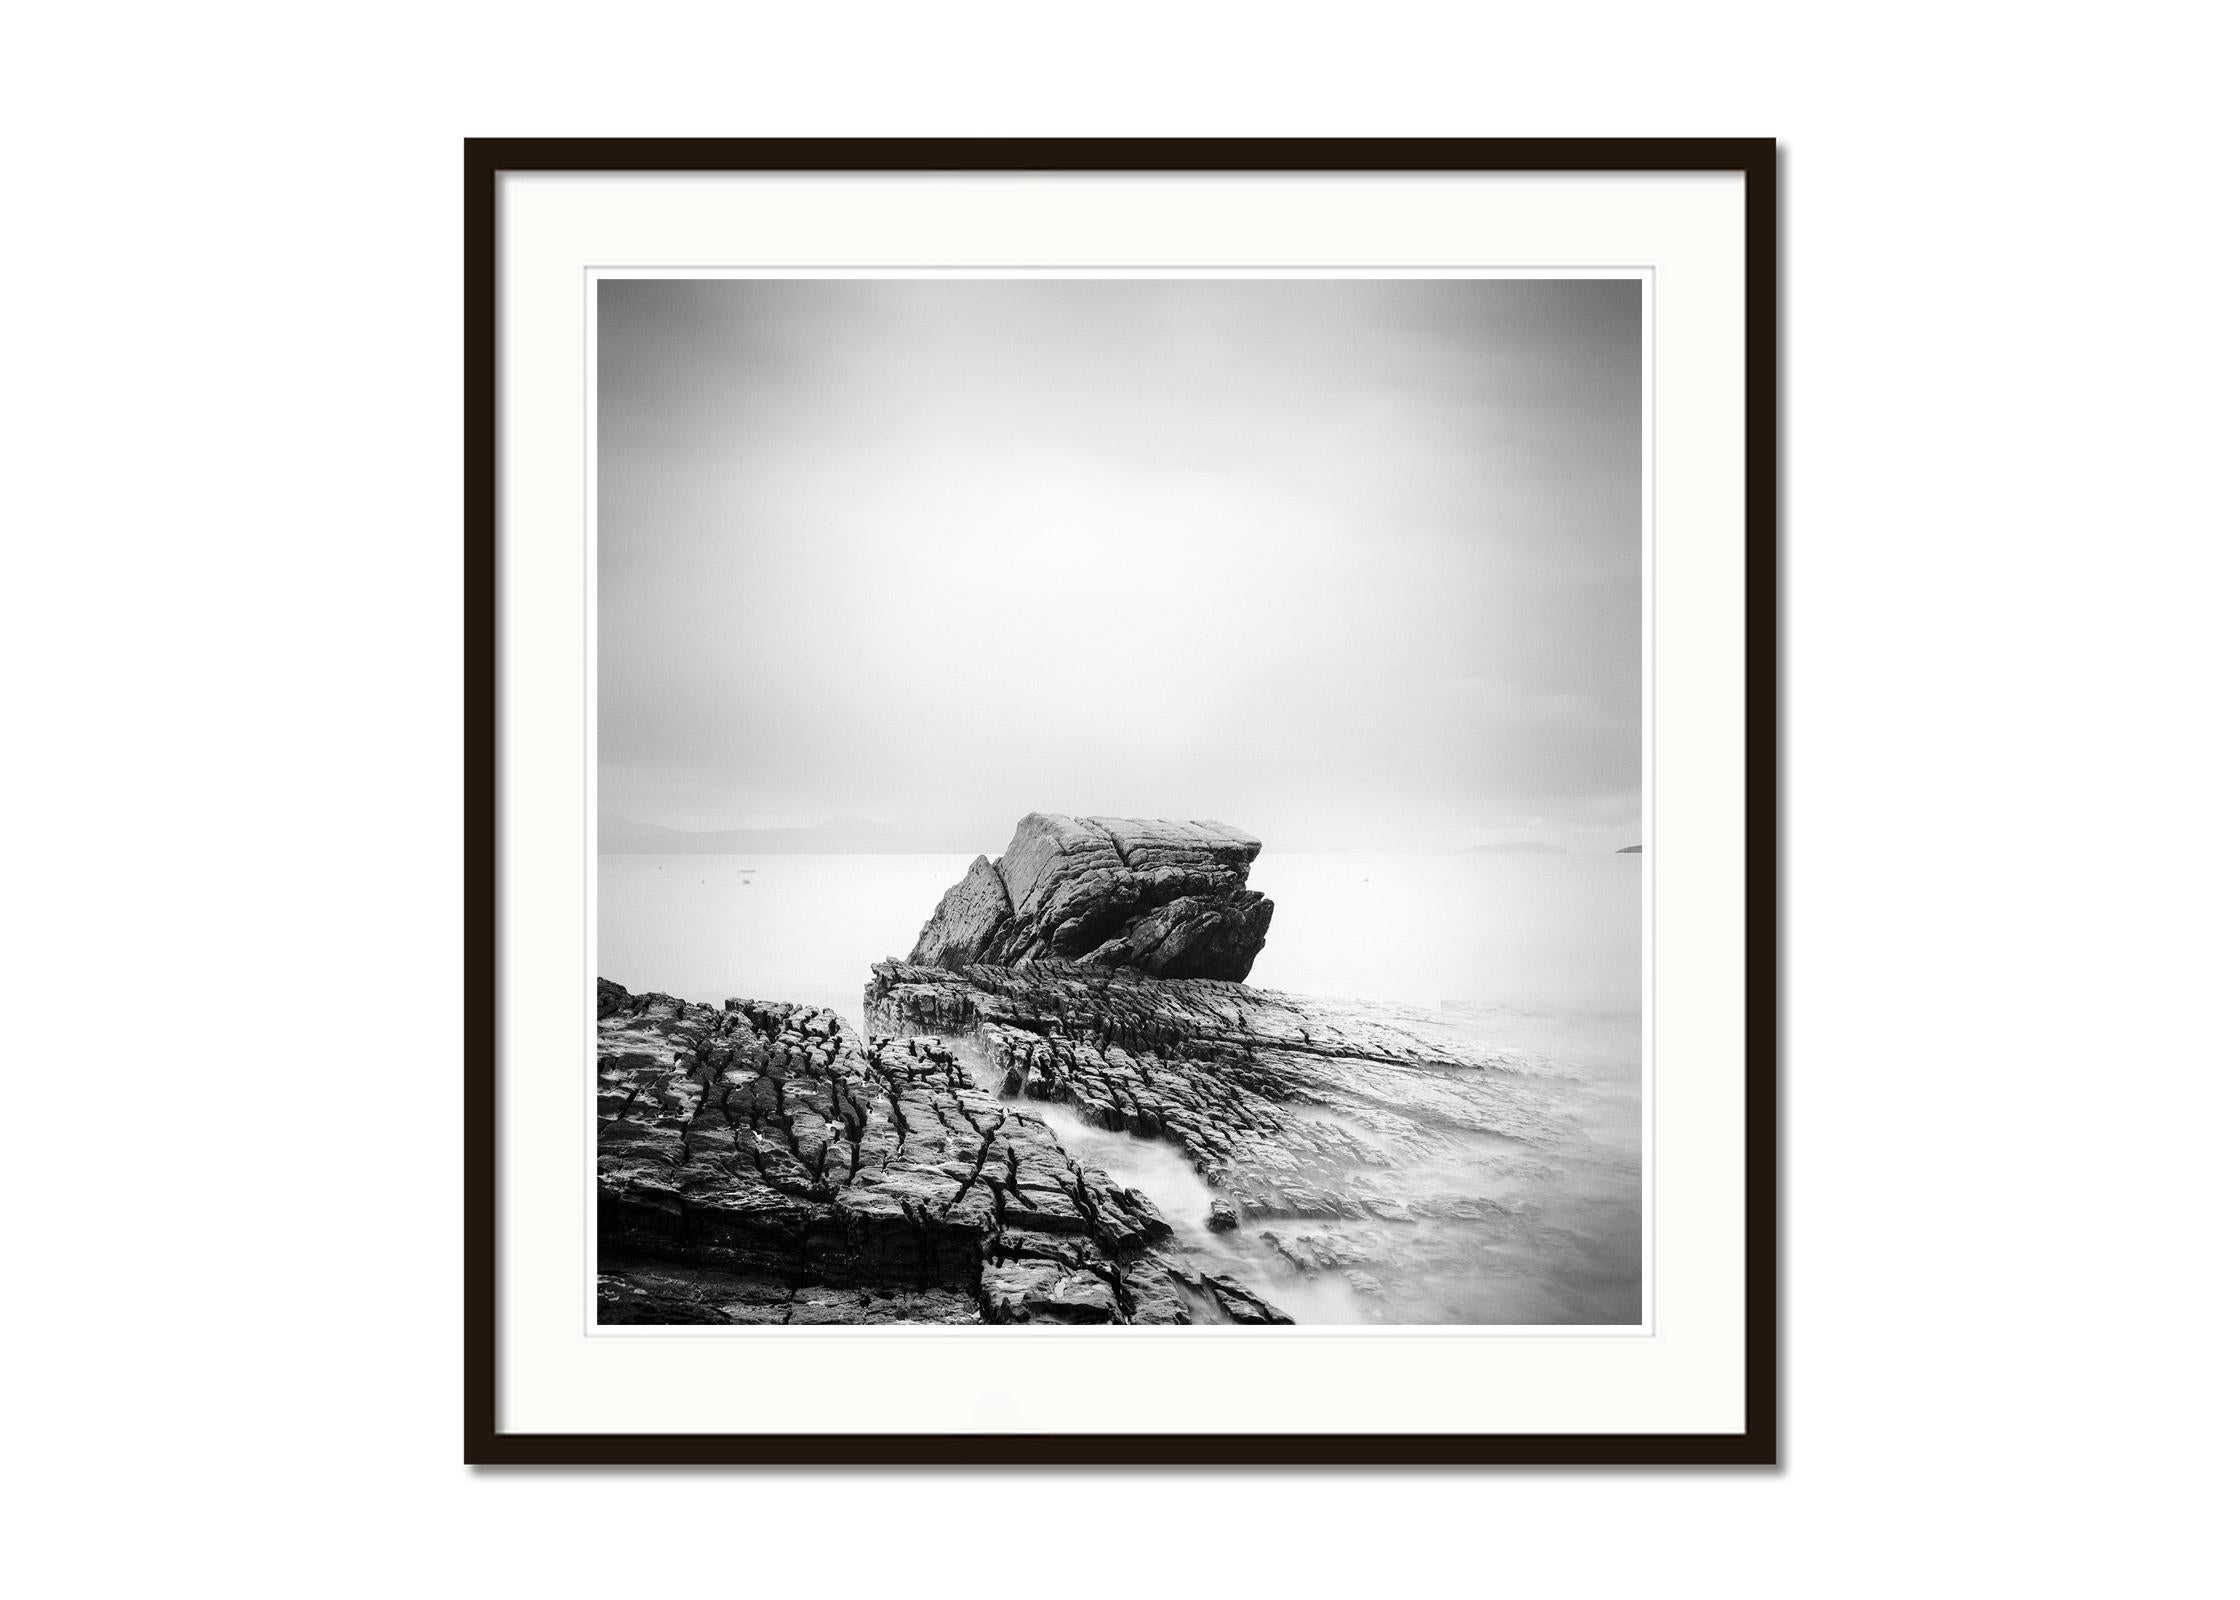 Fissured Rock, scottish Coast, Isle of Sky, minimalist black and white landscape - Gray Black and White Photograph by Gerald Berghammer